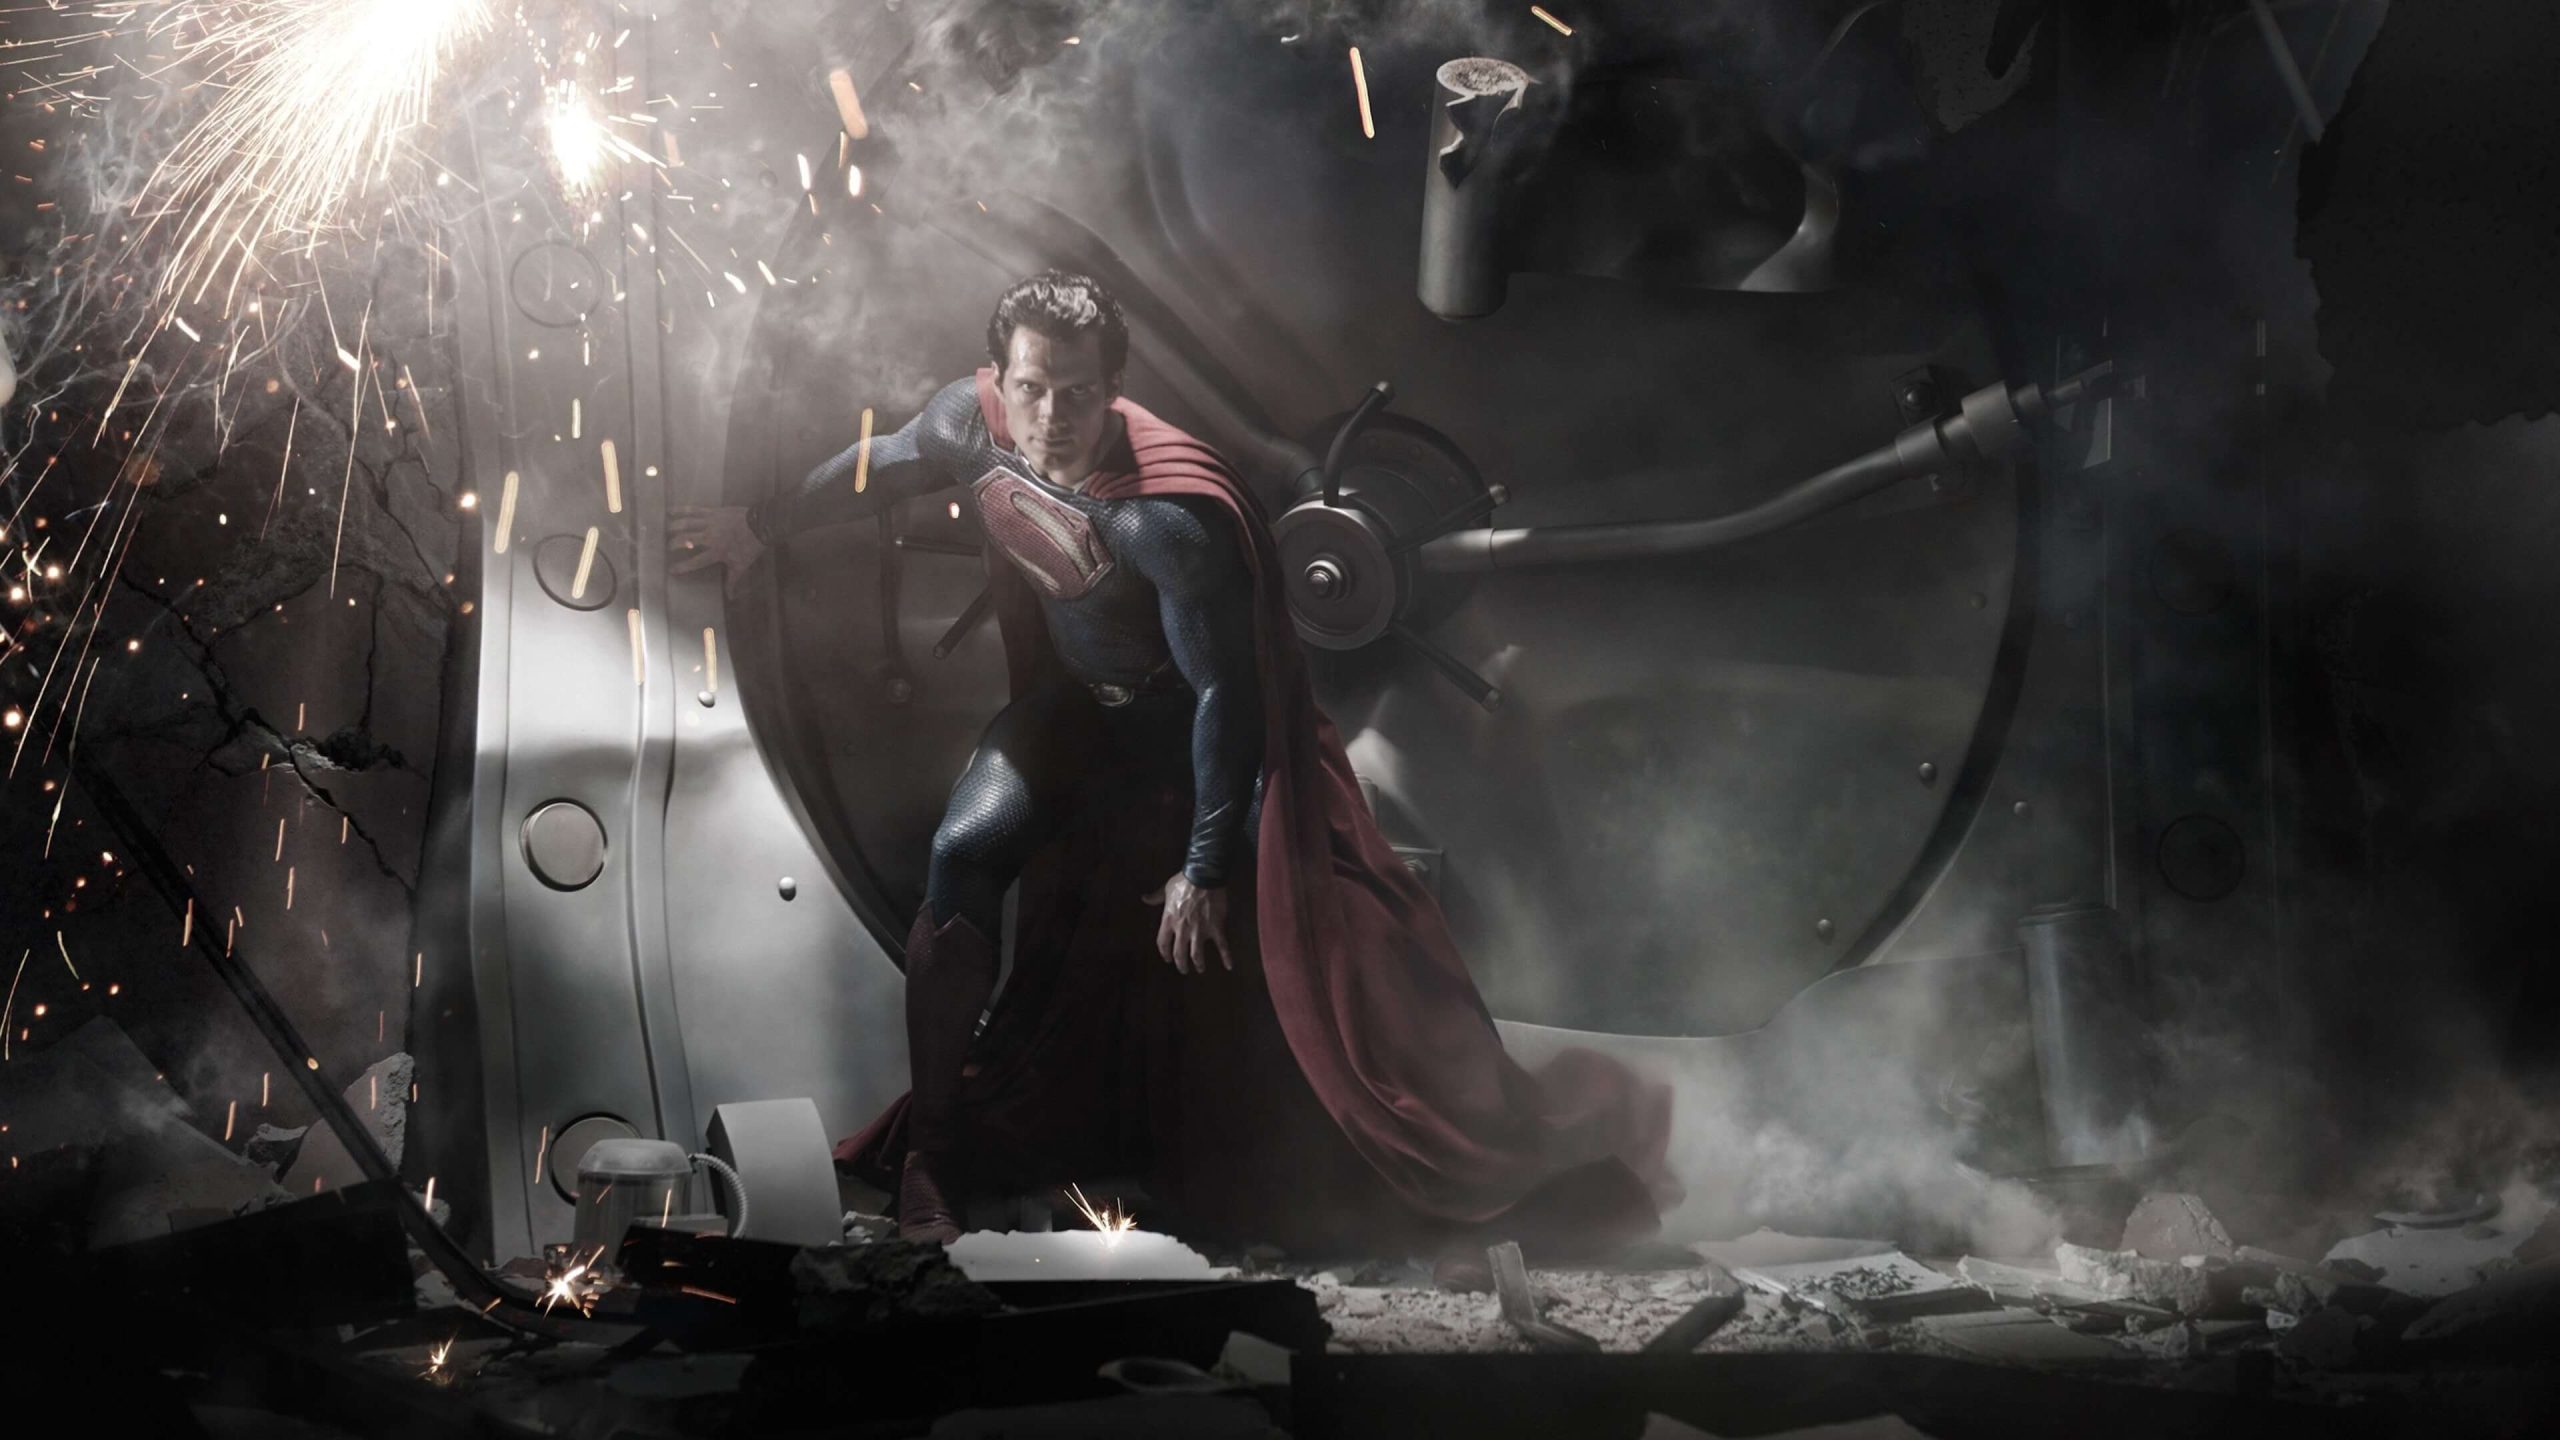 DC’s Man of Steel earned $668 million at the Box Office